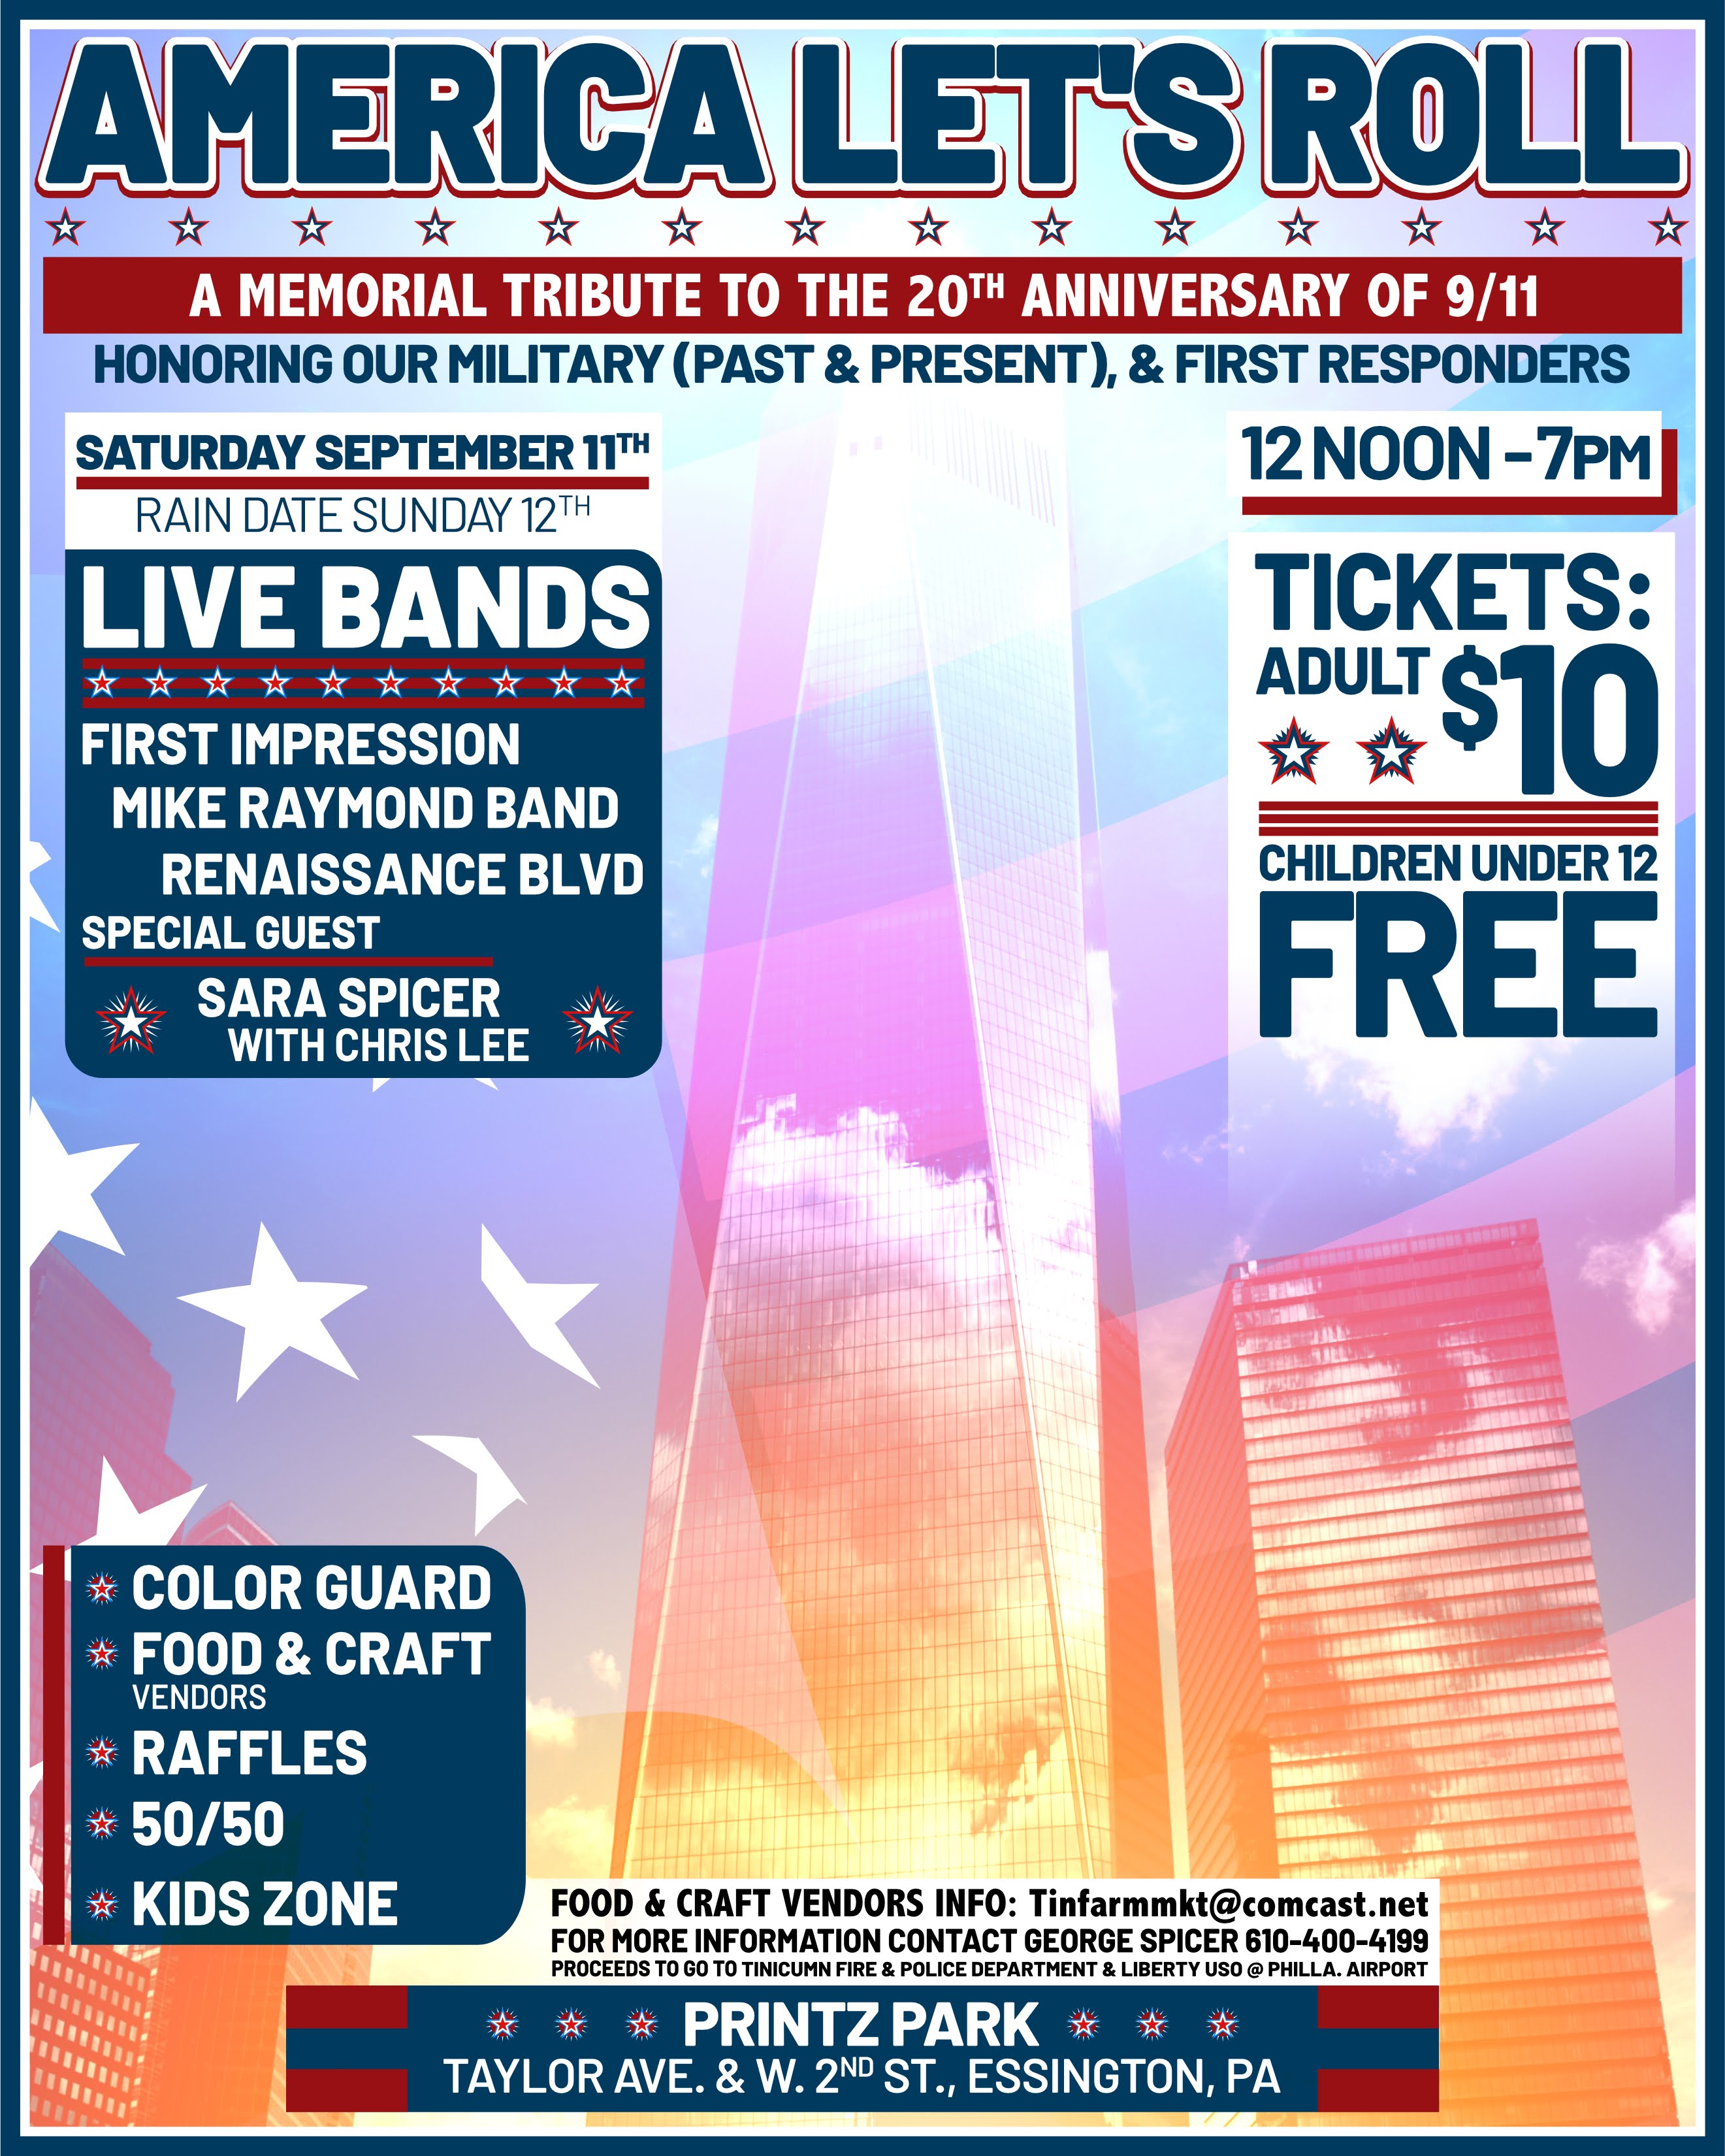 America Let's Roll event poster